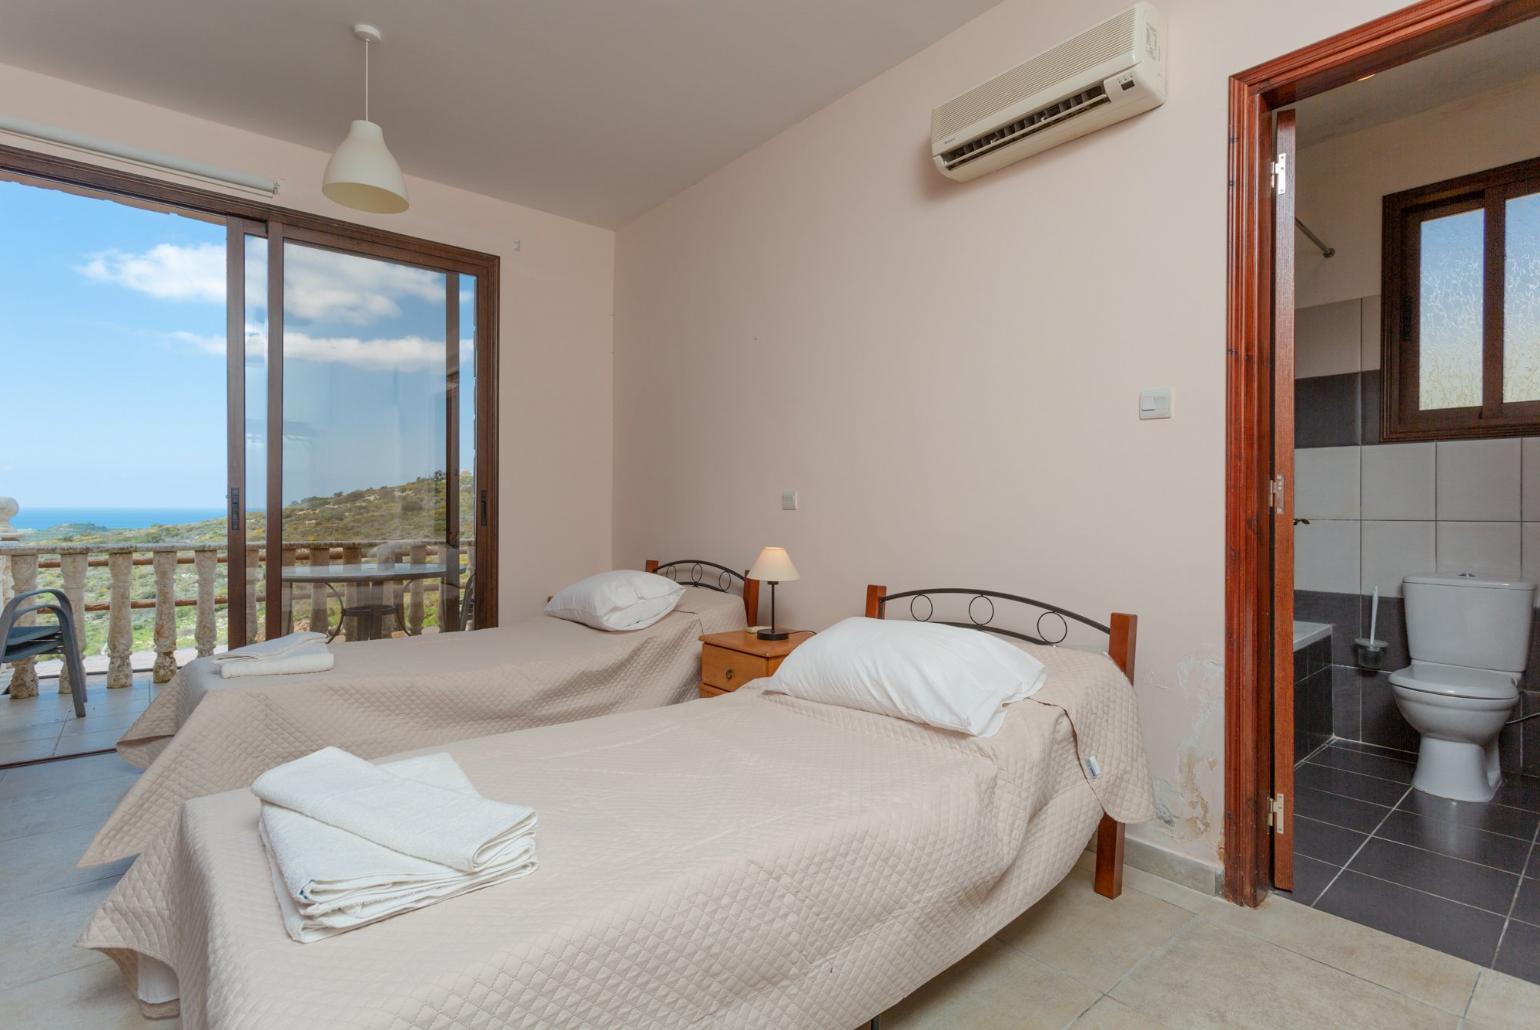 Twin bedroom with en suite bathroom, A/C, and terrace access with panoramic views of the sea and countryside